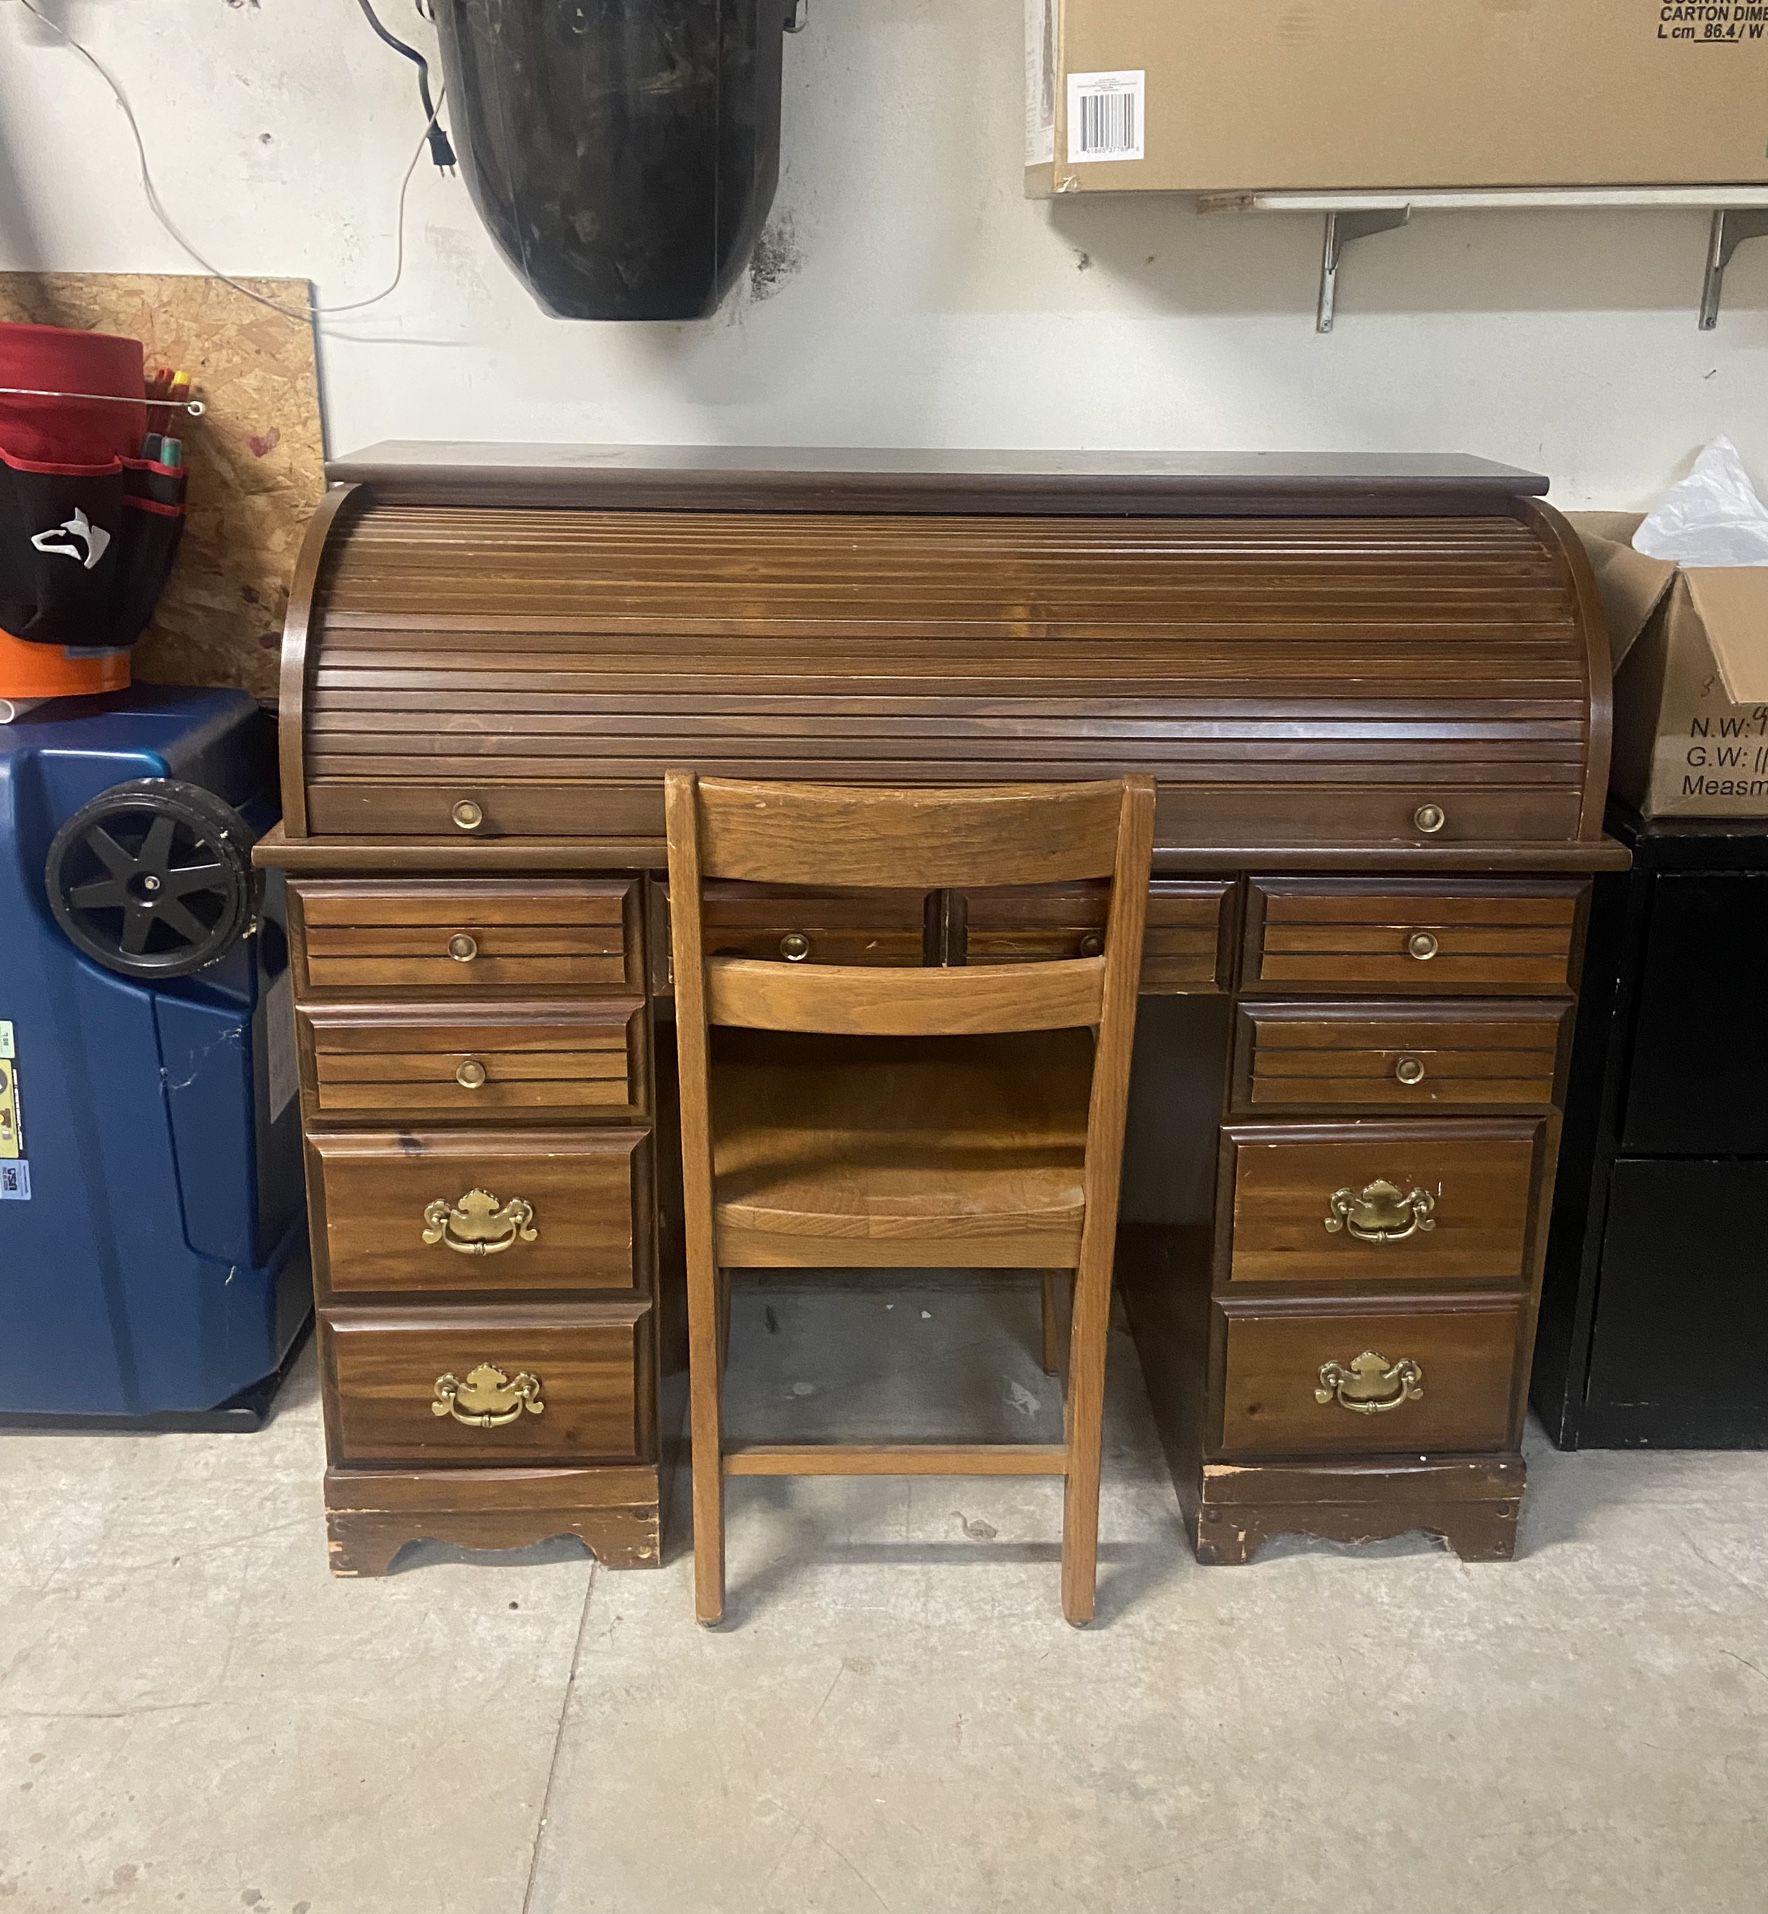 FREE Antique Roll Top Desk W/Chair 